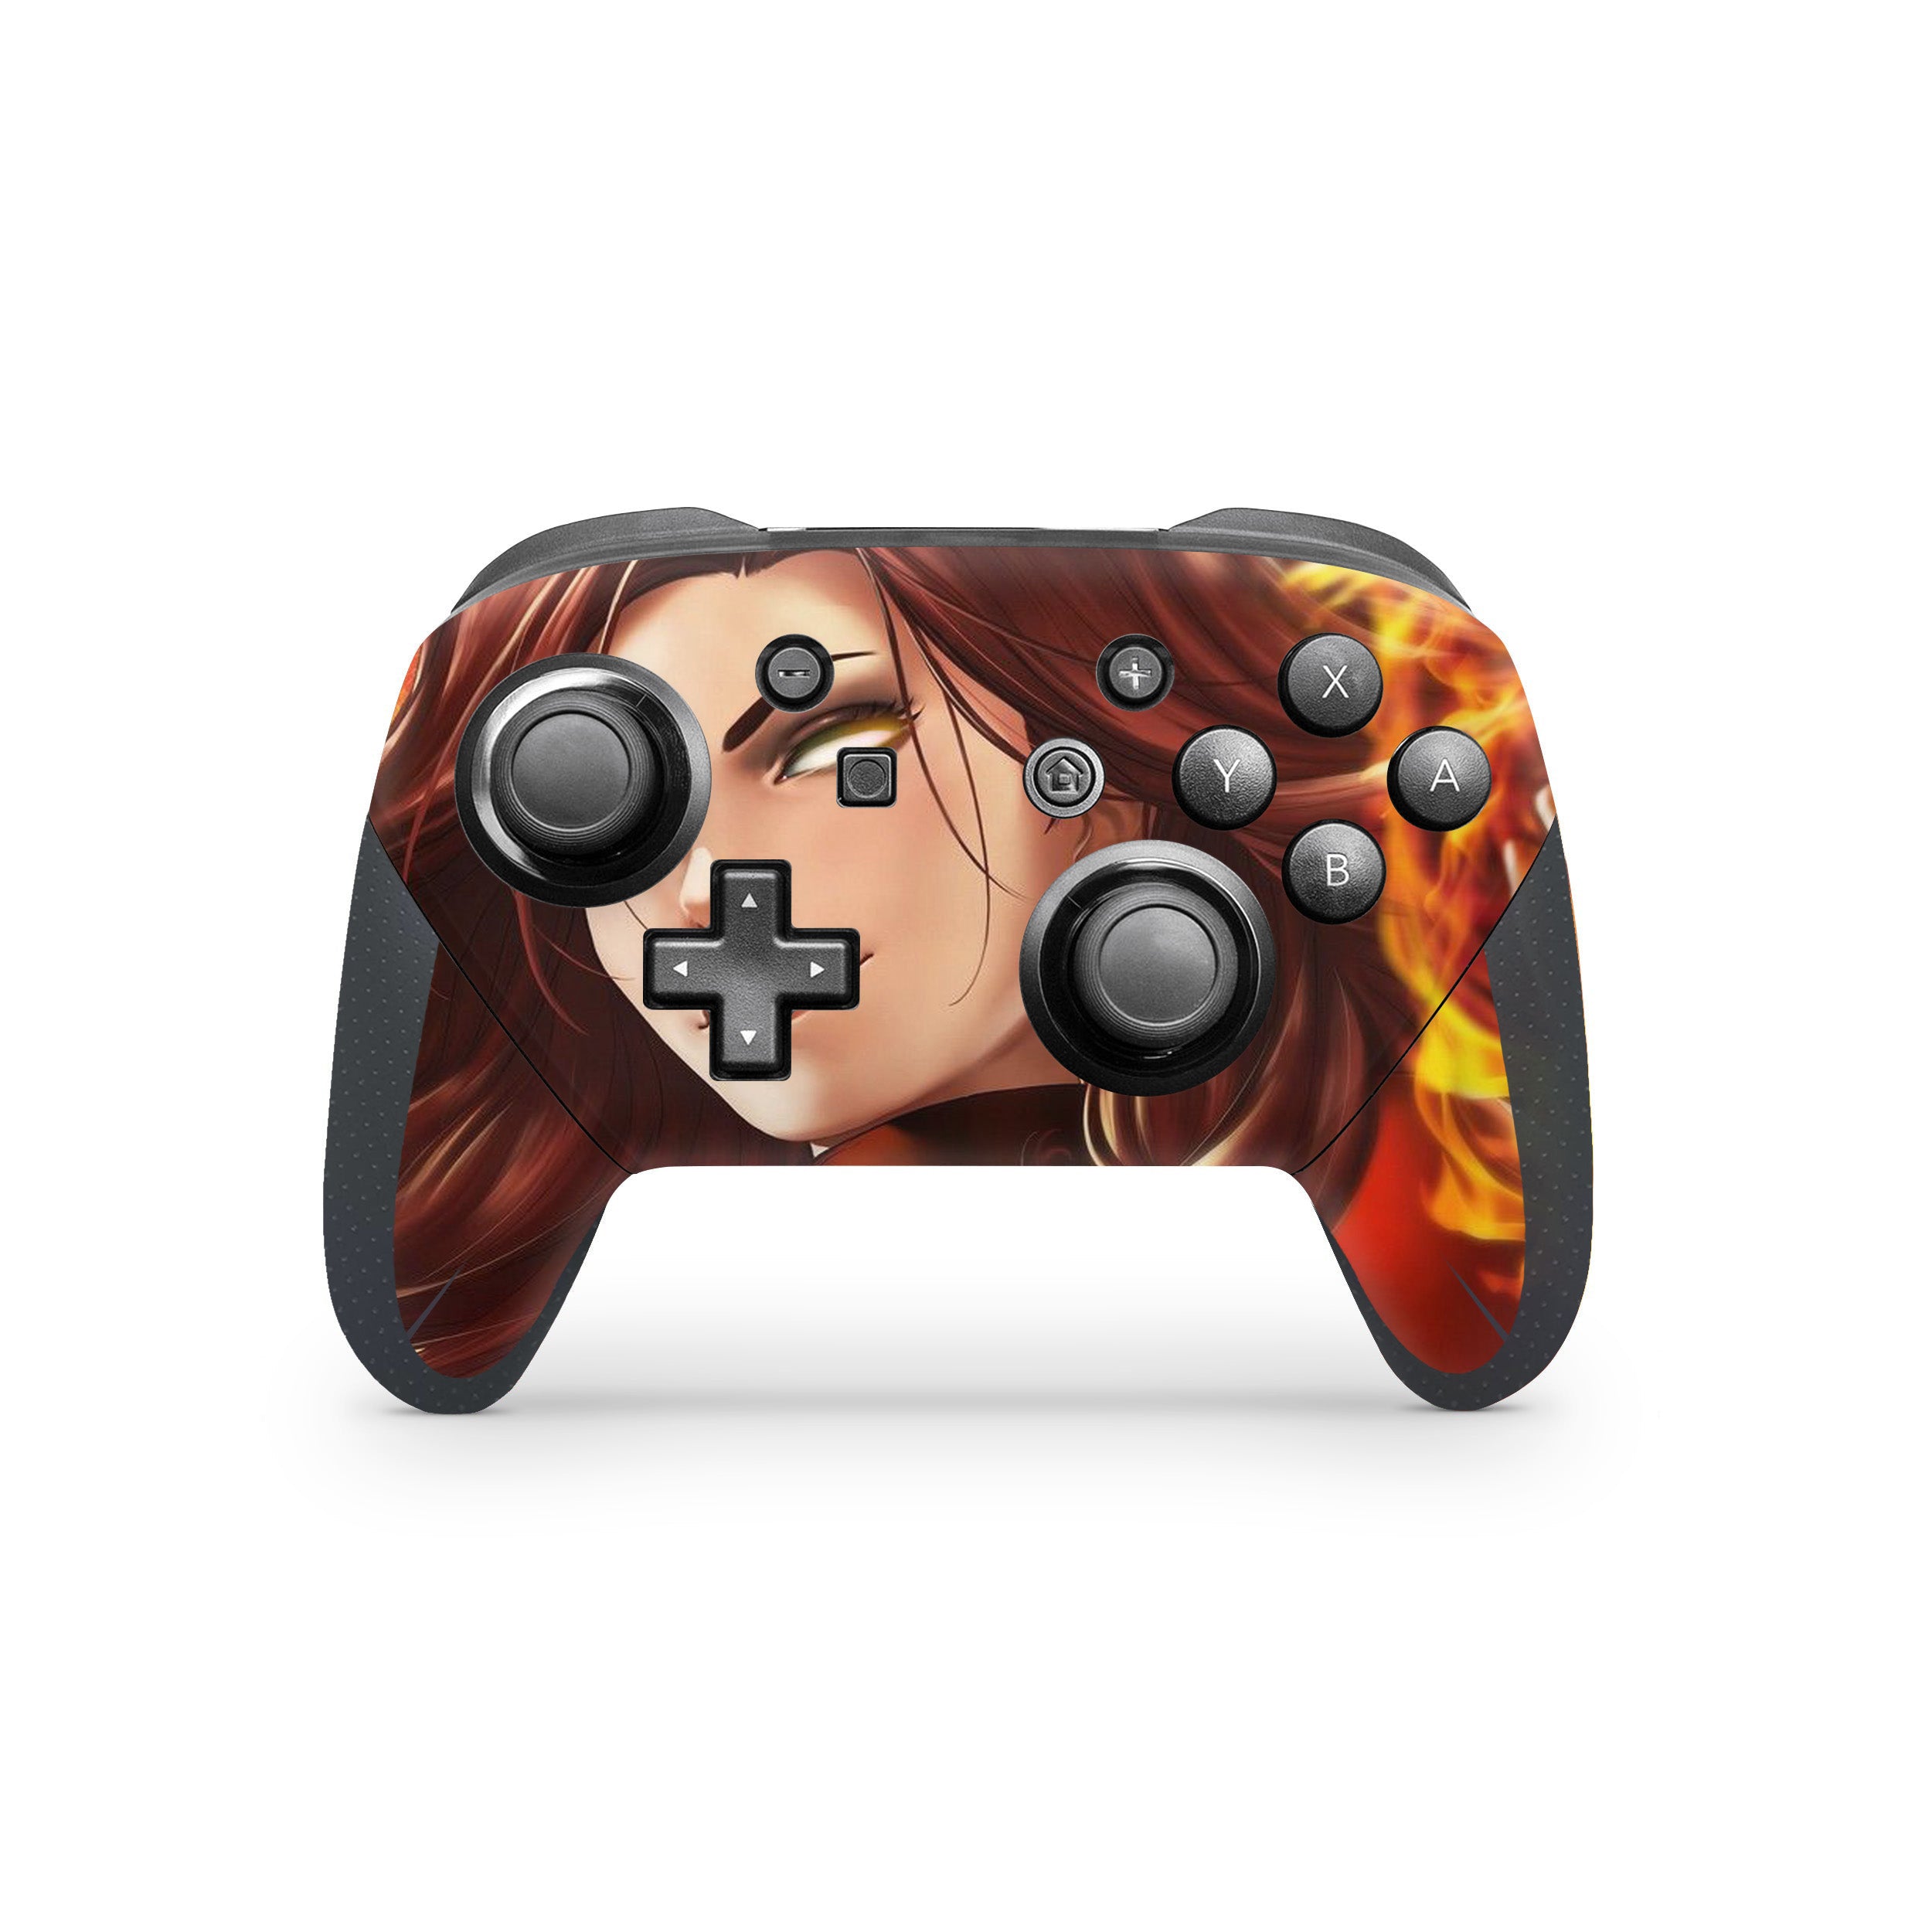 A video game skin featuring a Marvel X Men Phoenix design for the Switch Pro Controller.